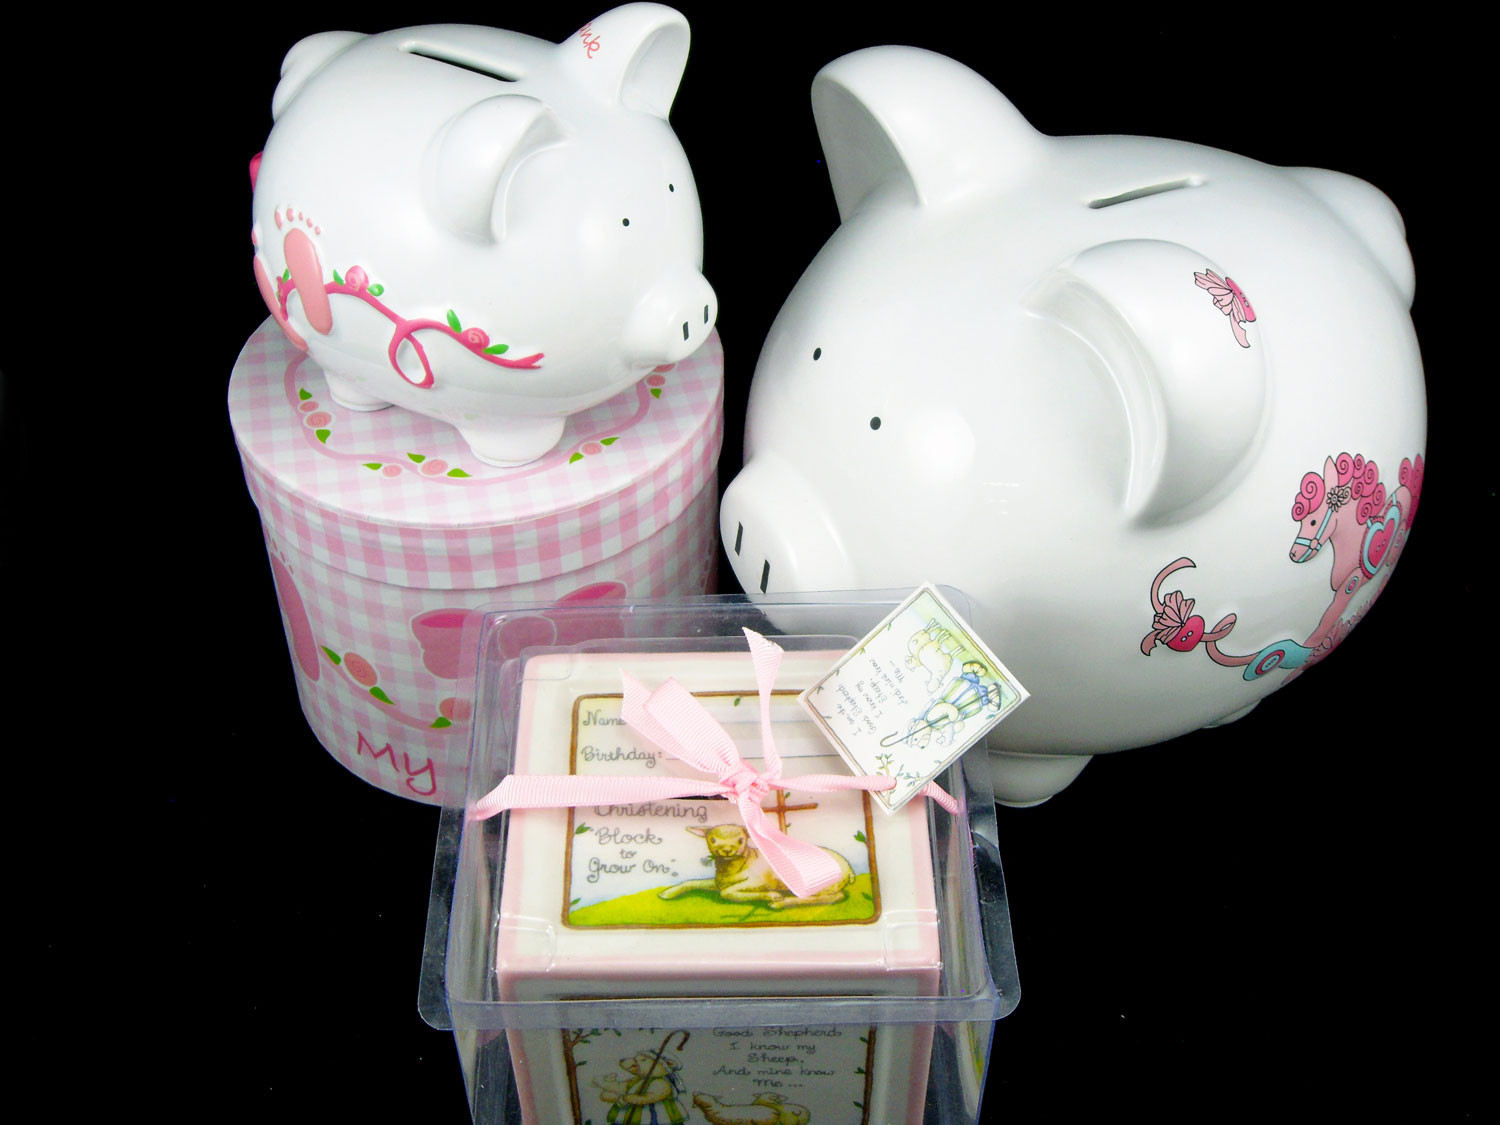 Unique Personalized Baby Gifts
 Piggy Banks Make Practical And Adorable Personalized Baby